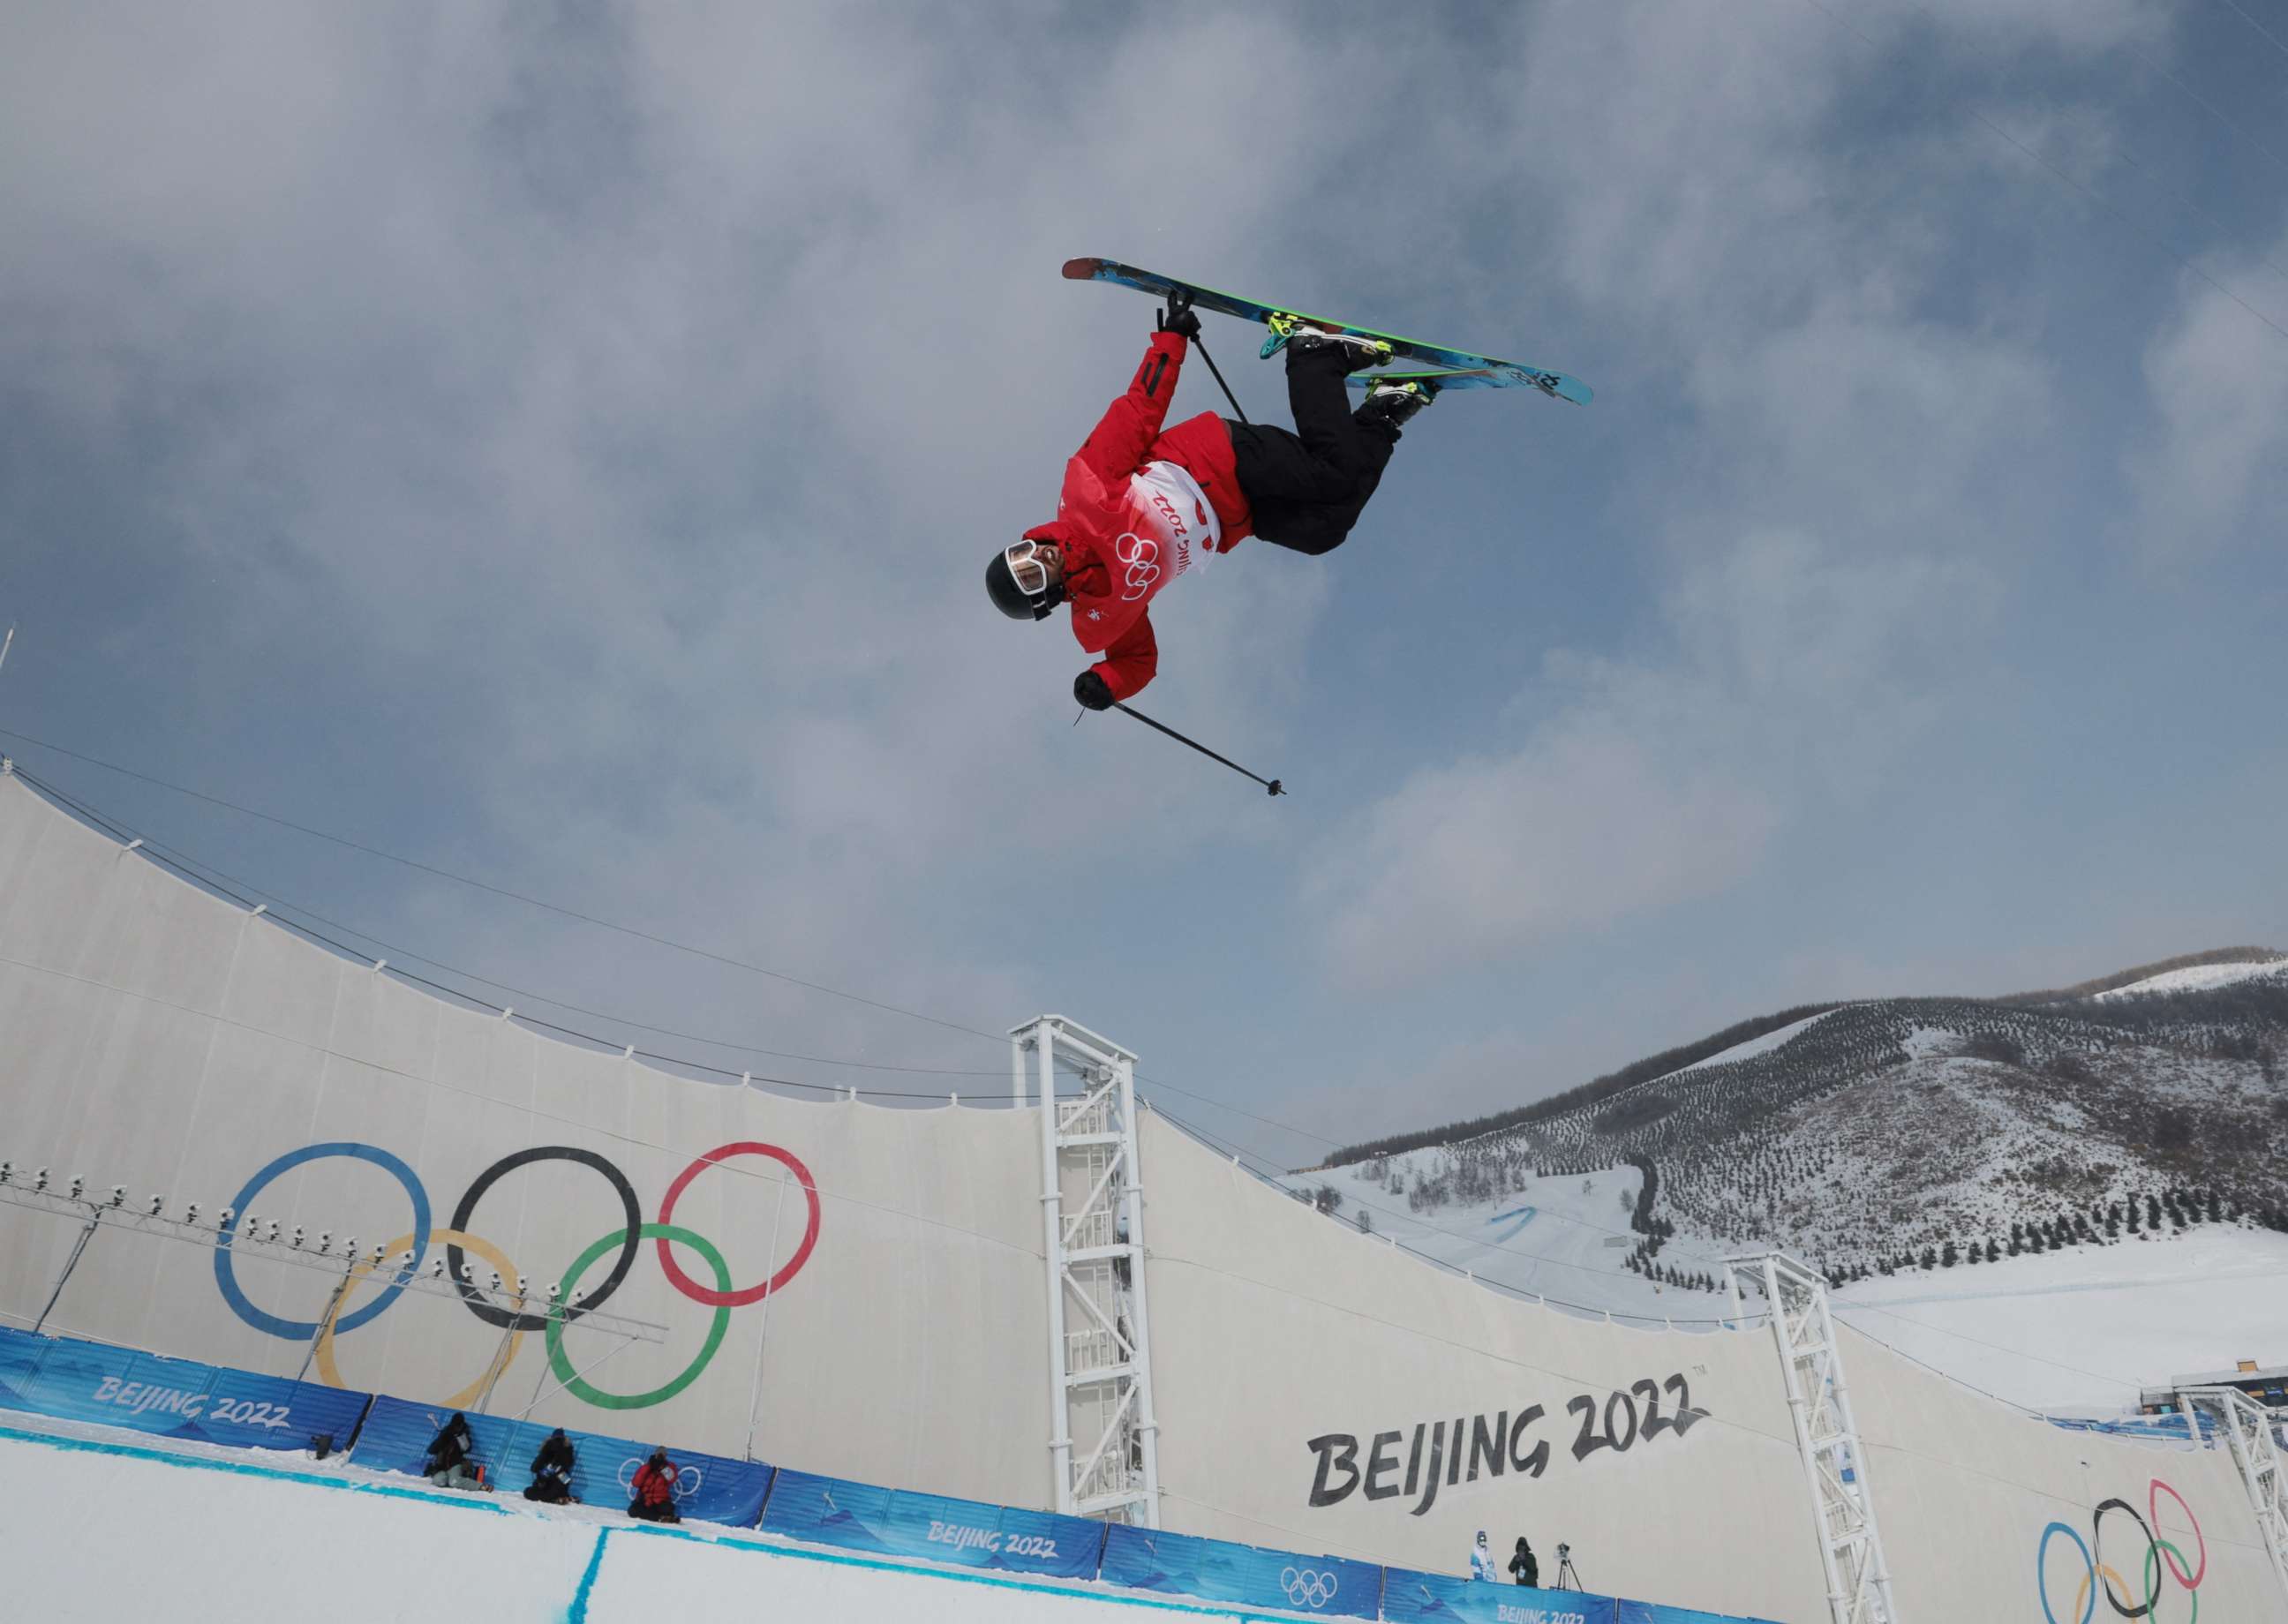 PHOTO: Kevin Rolland of Team France soars above the halfpipe in the men's freeski at the 2022 Beijing Olympics on Feb. 19, 2022